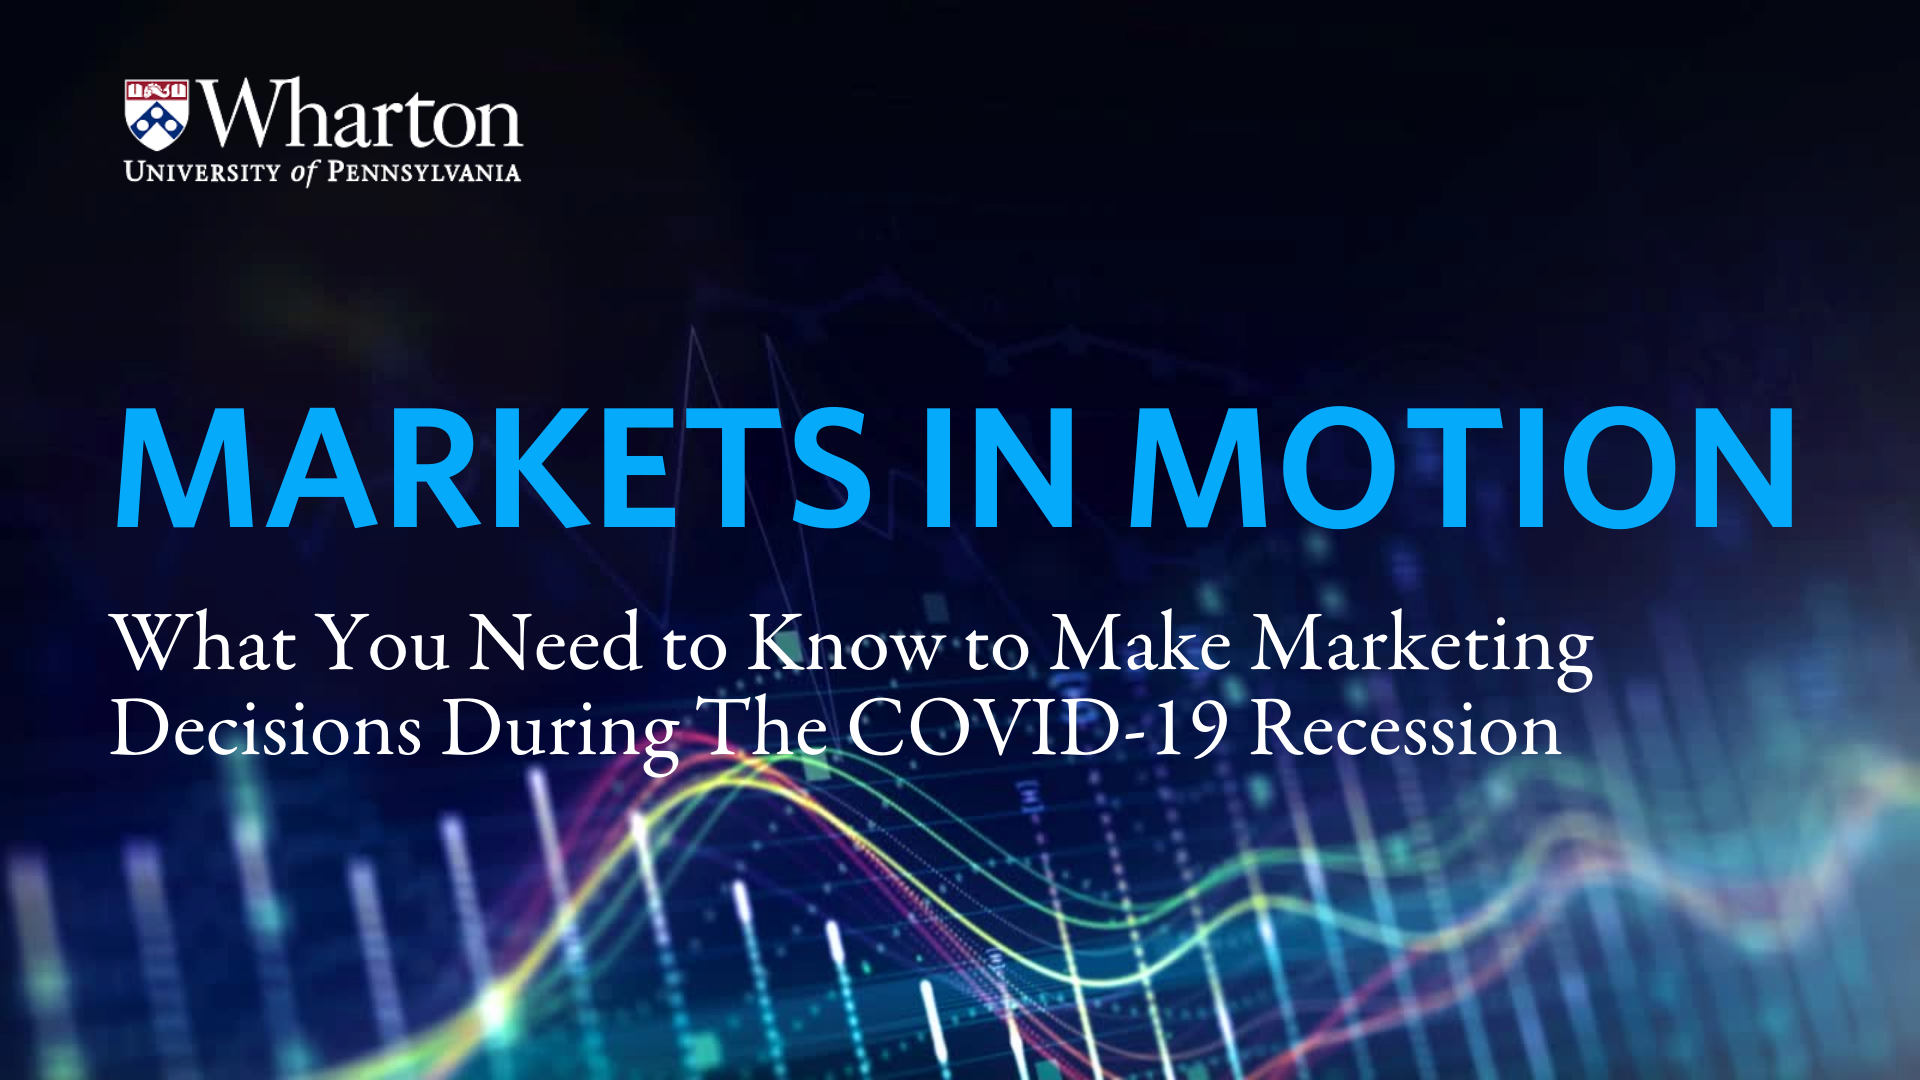 Graphic - "Markets in Motion: What you need to know to make marketing decisions during the COVID-19 Recession